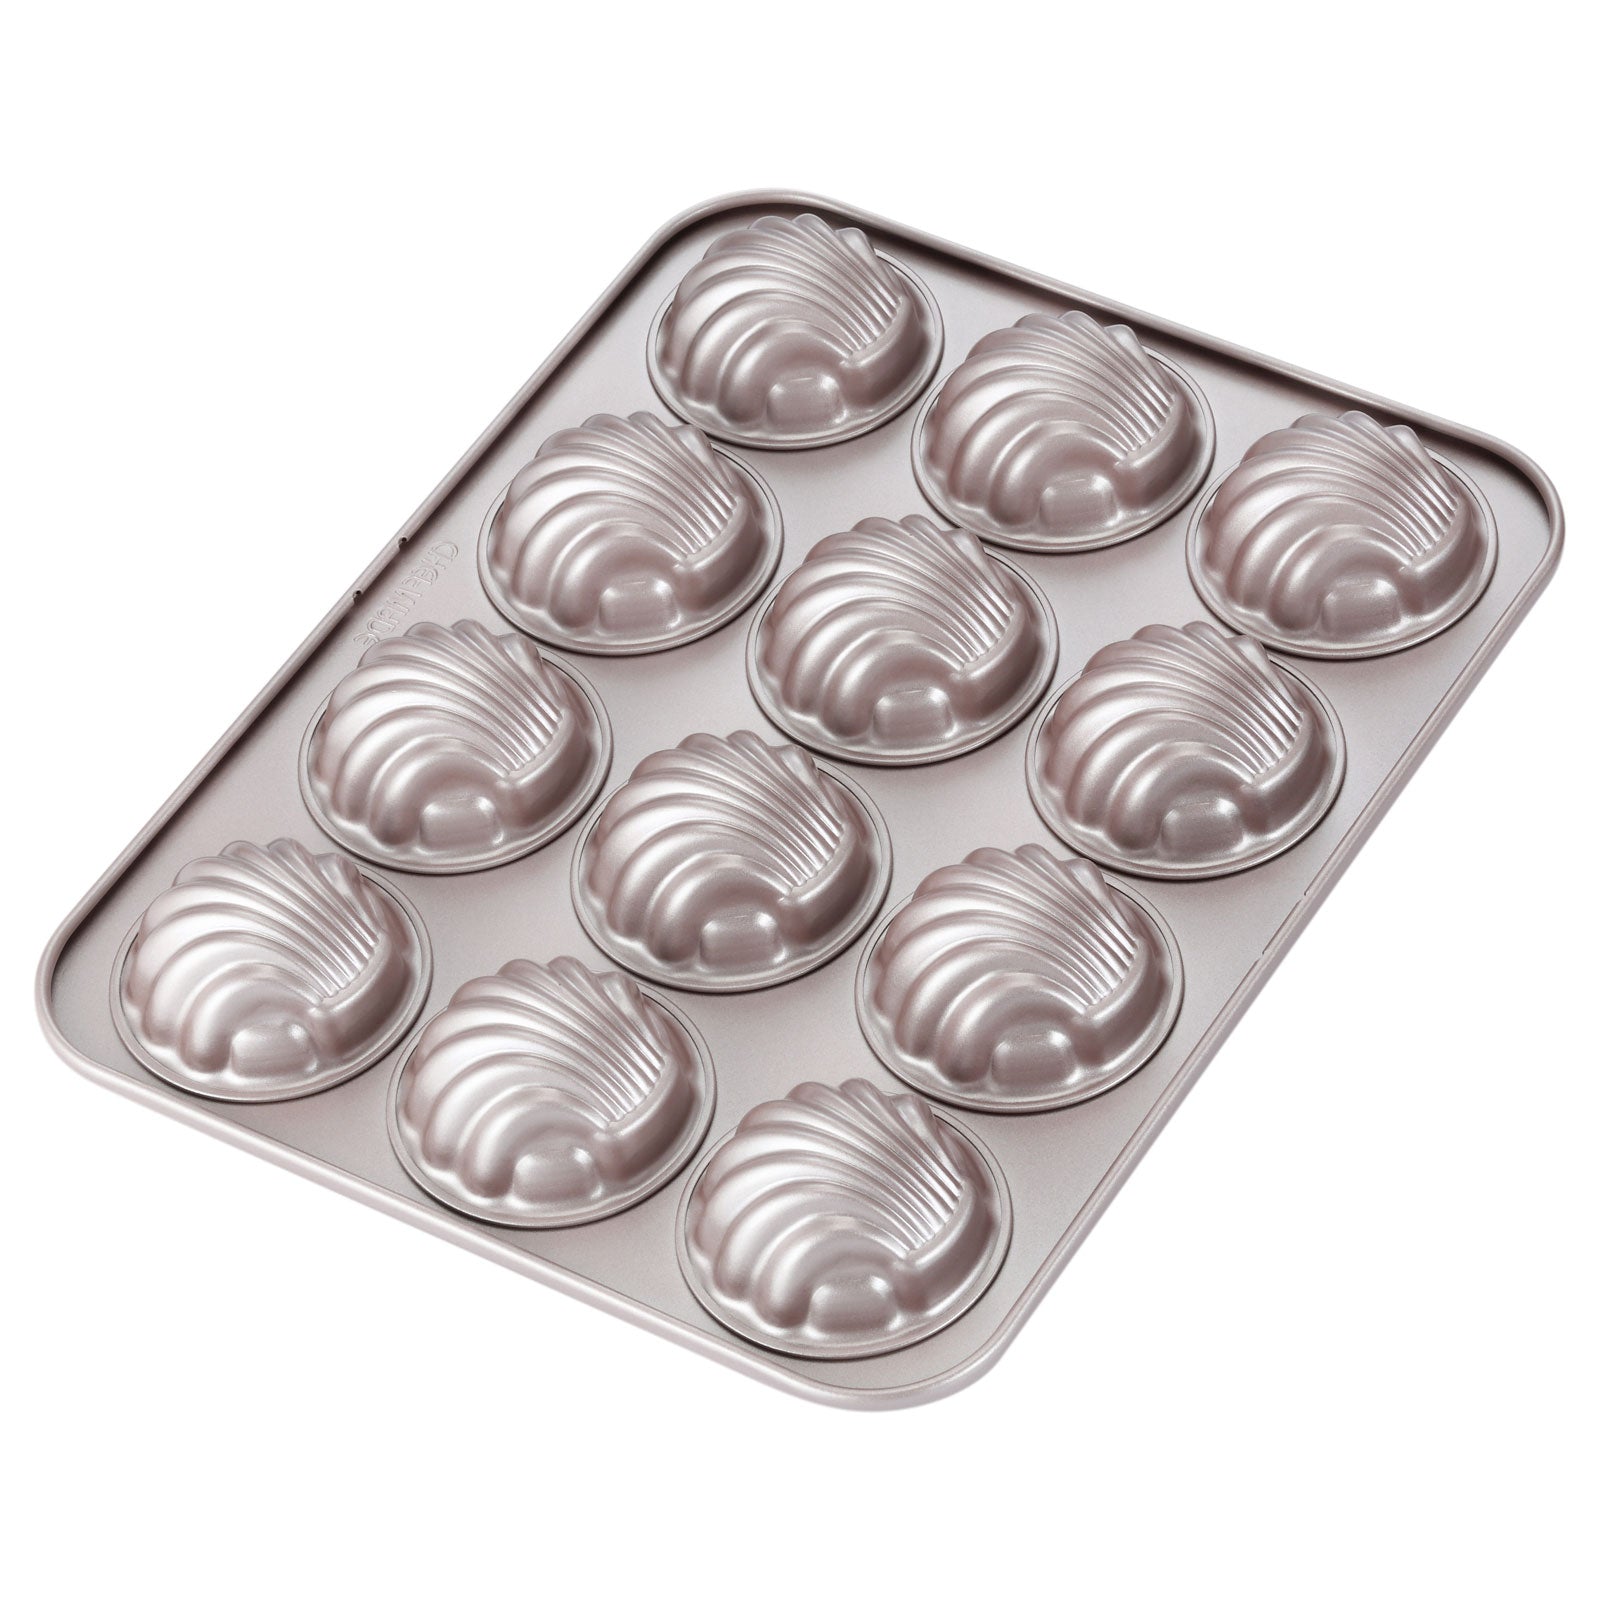 Donut Cake Pan Fancy-Shaped 6 Well - CHEFMADE official store